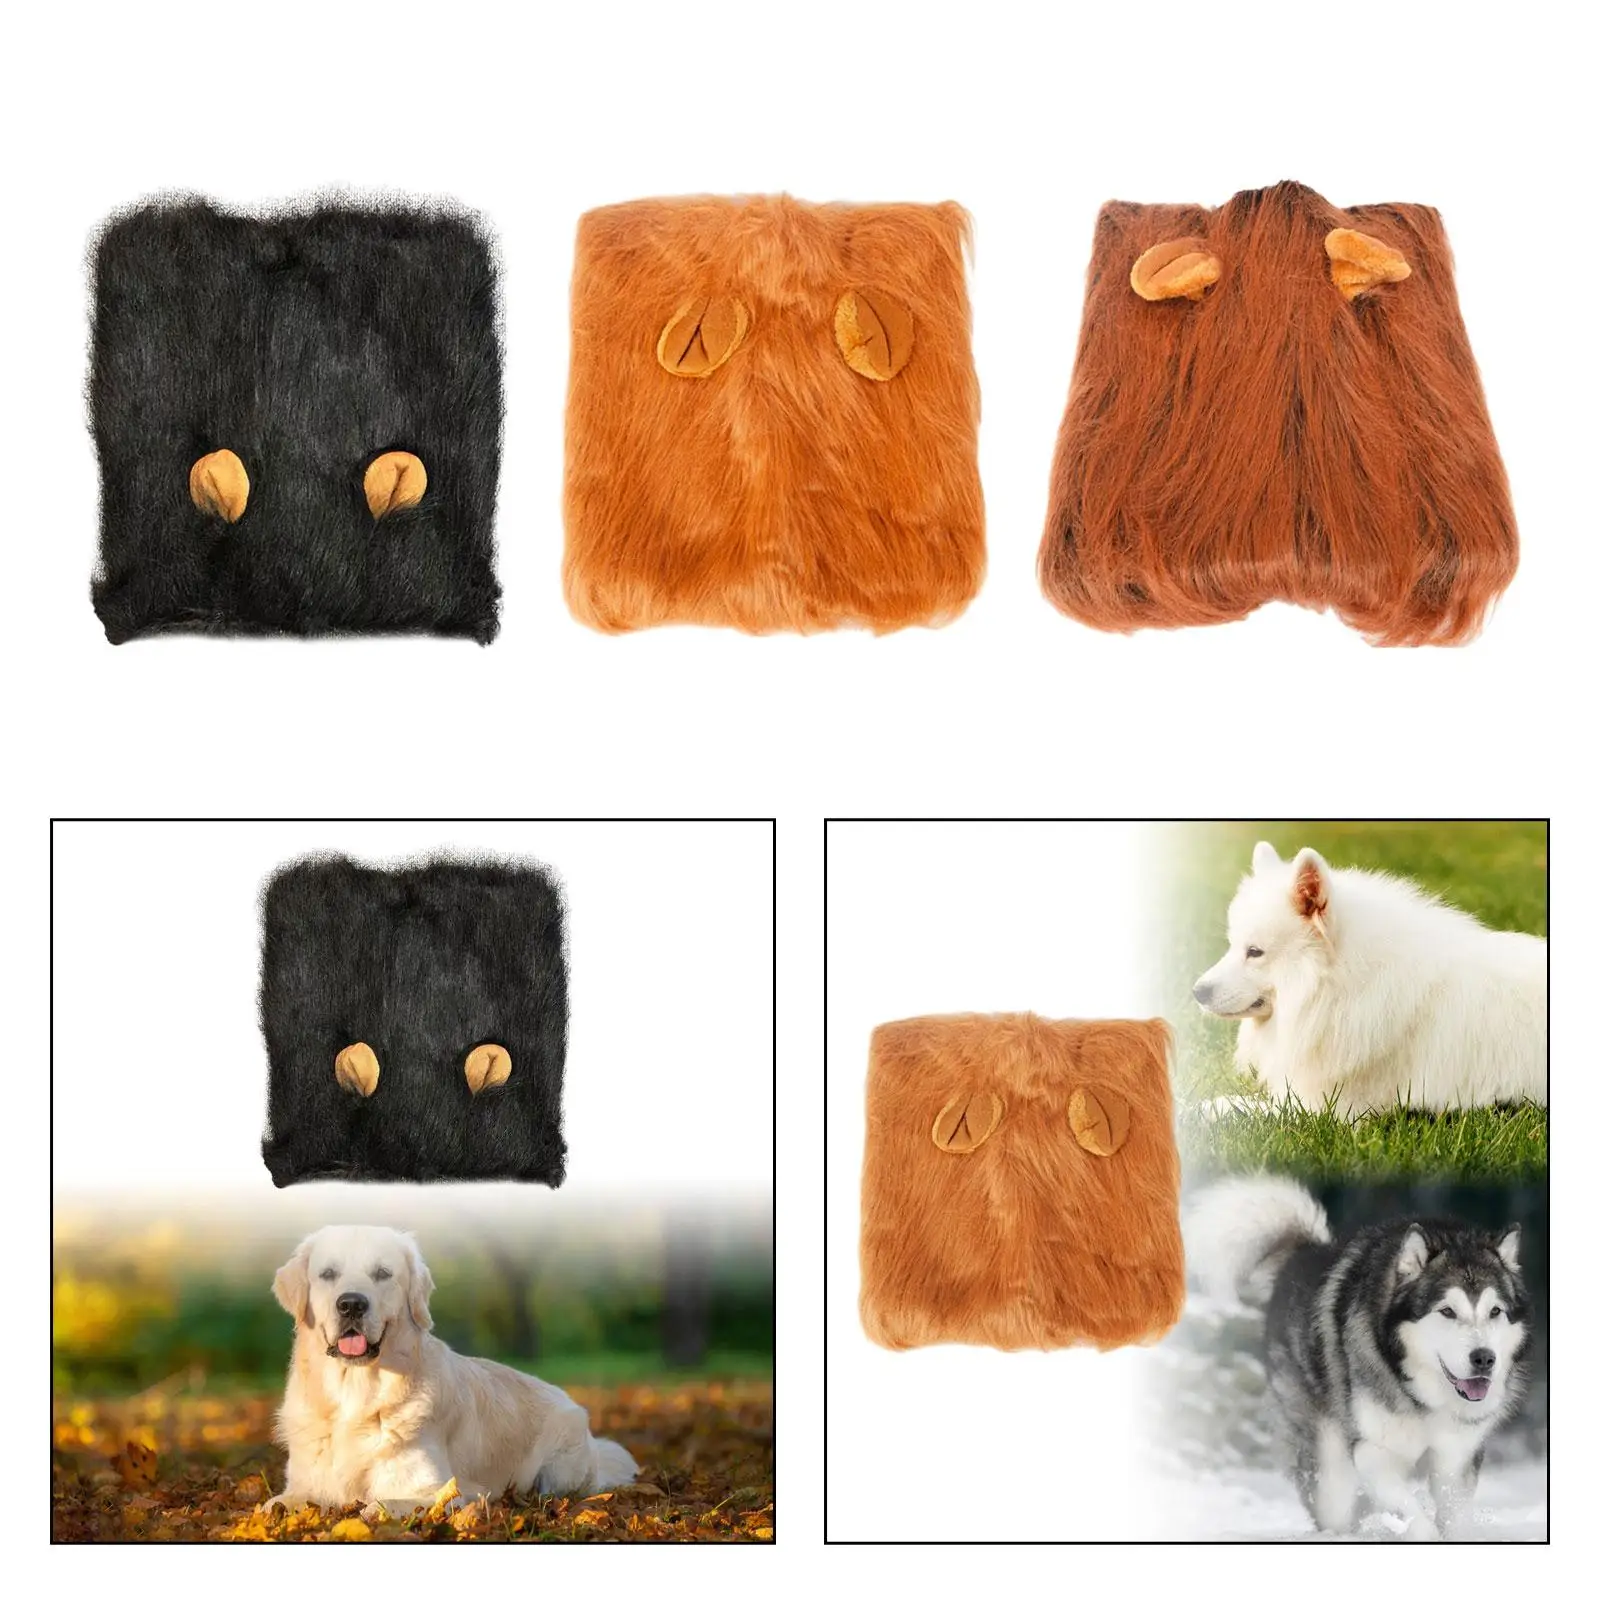 Mane Costume for Cat Funny Cute Pet Clothing Accessories Headwear Outfit for Party Fancy Dress up Large Dogs Halloween Role Play